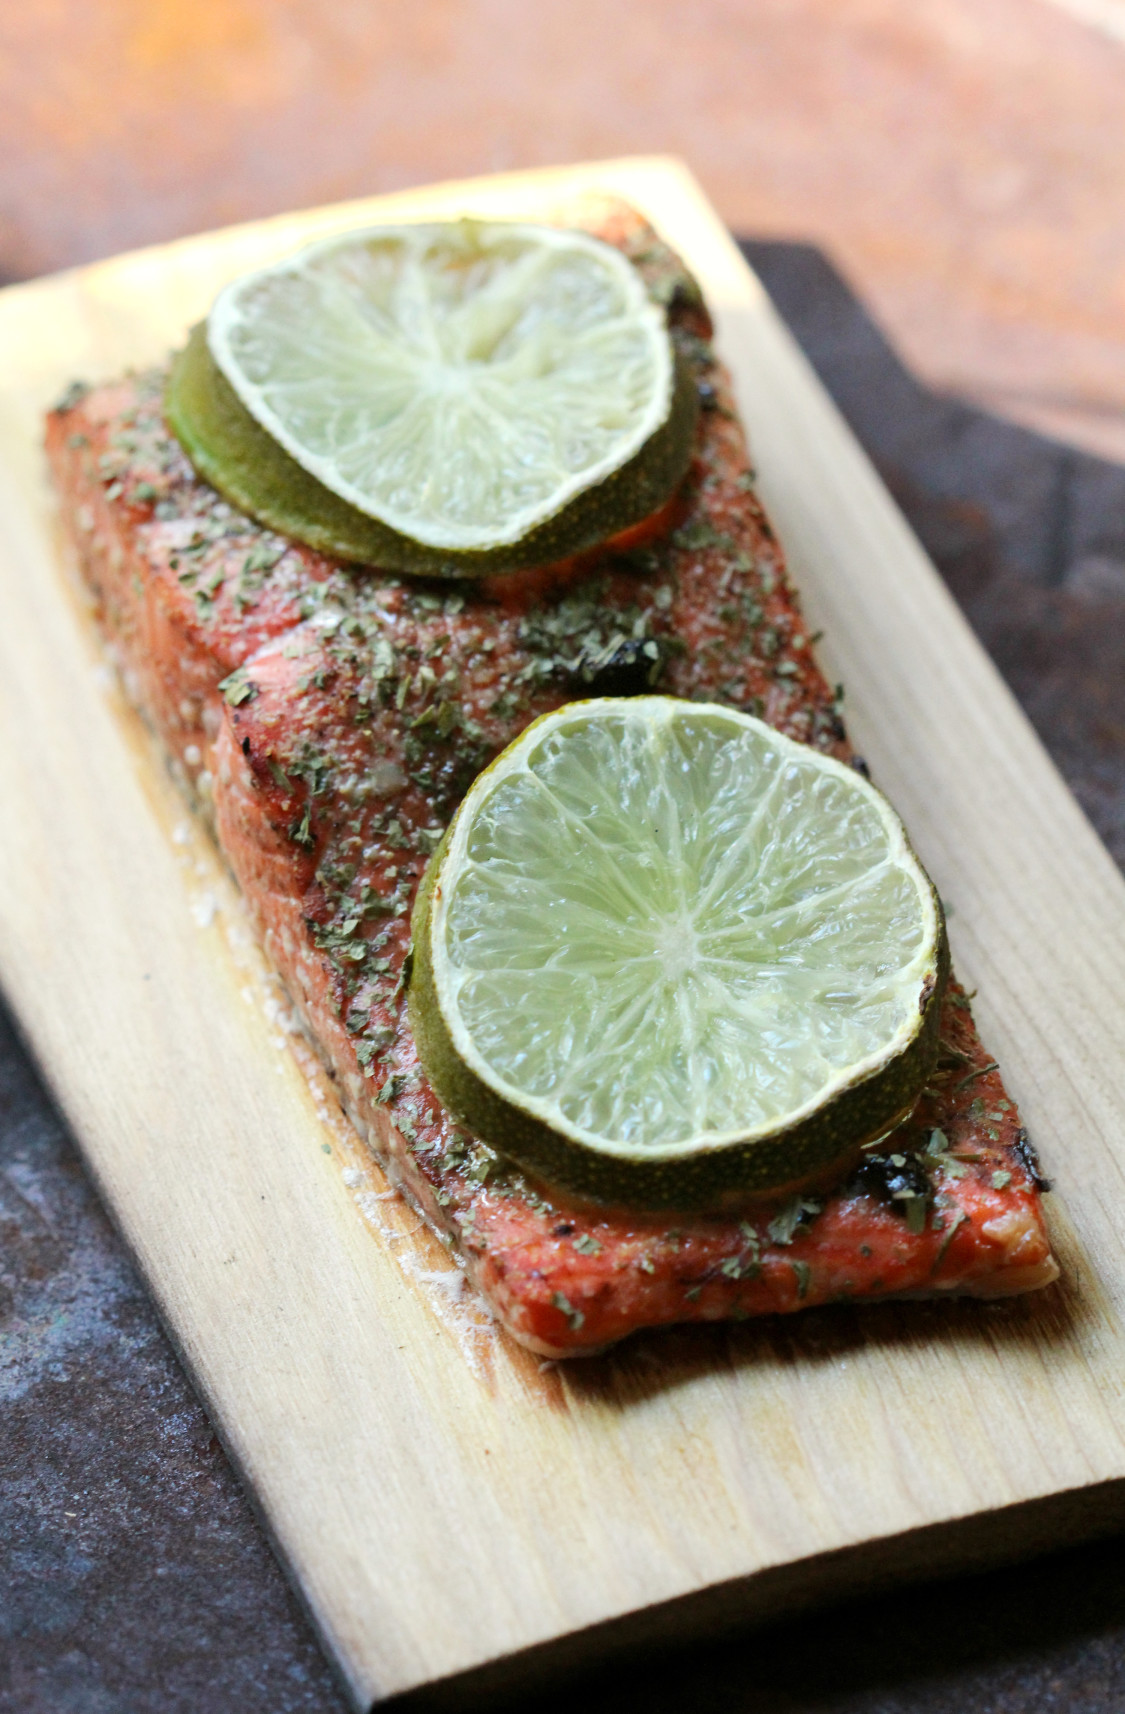 Black Garlic & Lime Cedar Plank Salmon | Strength and Sunshine @RebeccaGF666 Black garlic and lime add even more flavor to smoky grilled cedar plank salmon. You won't have to wait long for this paleo and gluten-free recipe to be cooked up; it's done in a snap and will surly satisfy! Perfect for a quick dinner or lunch!